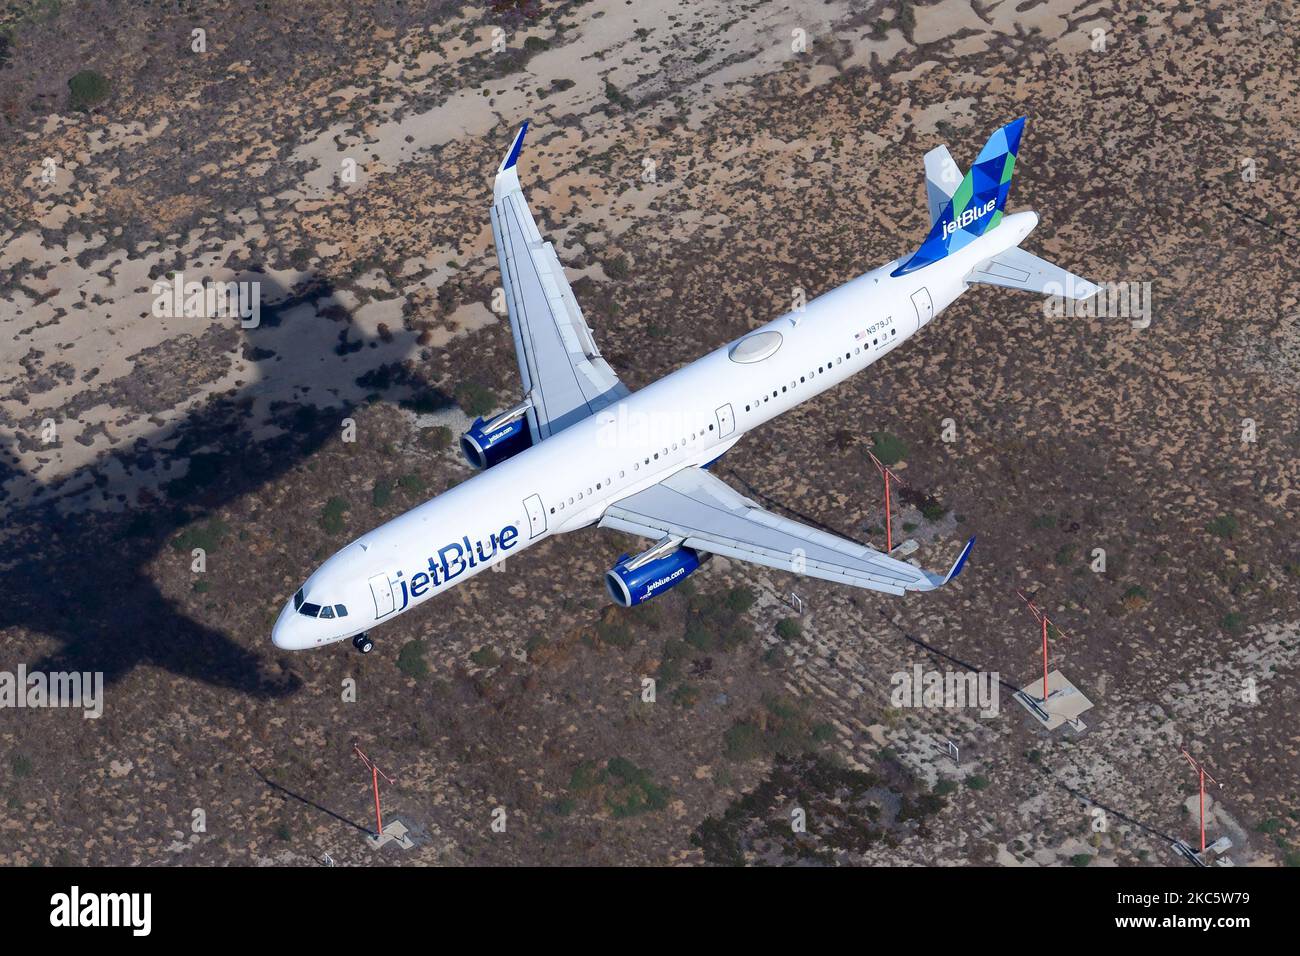 Jetblue Airways Airbus A321 aircraft landing. Airplane A321 of Jet Blue airline registered as N979JT. Stock Photo